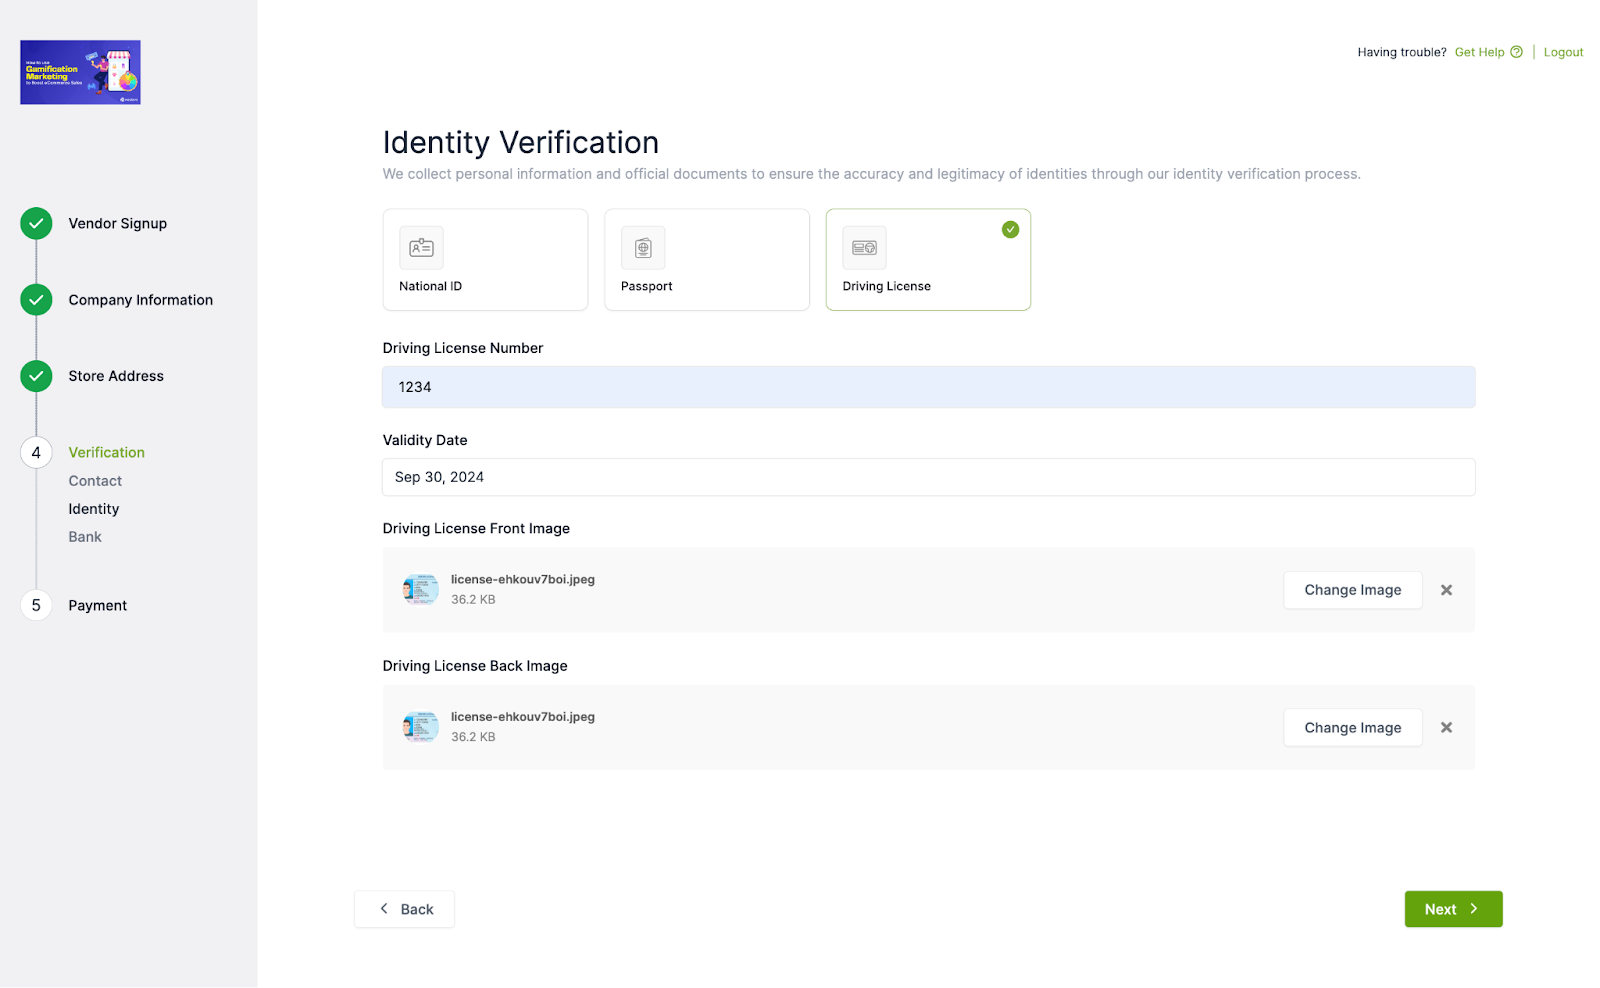 This image shows the identity verification of the vendor